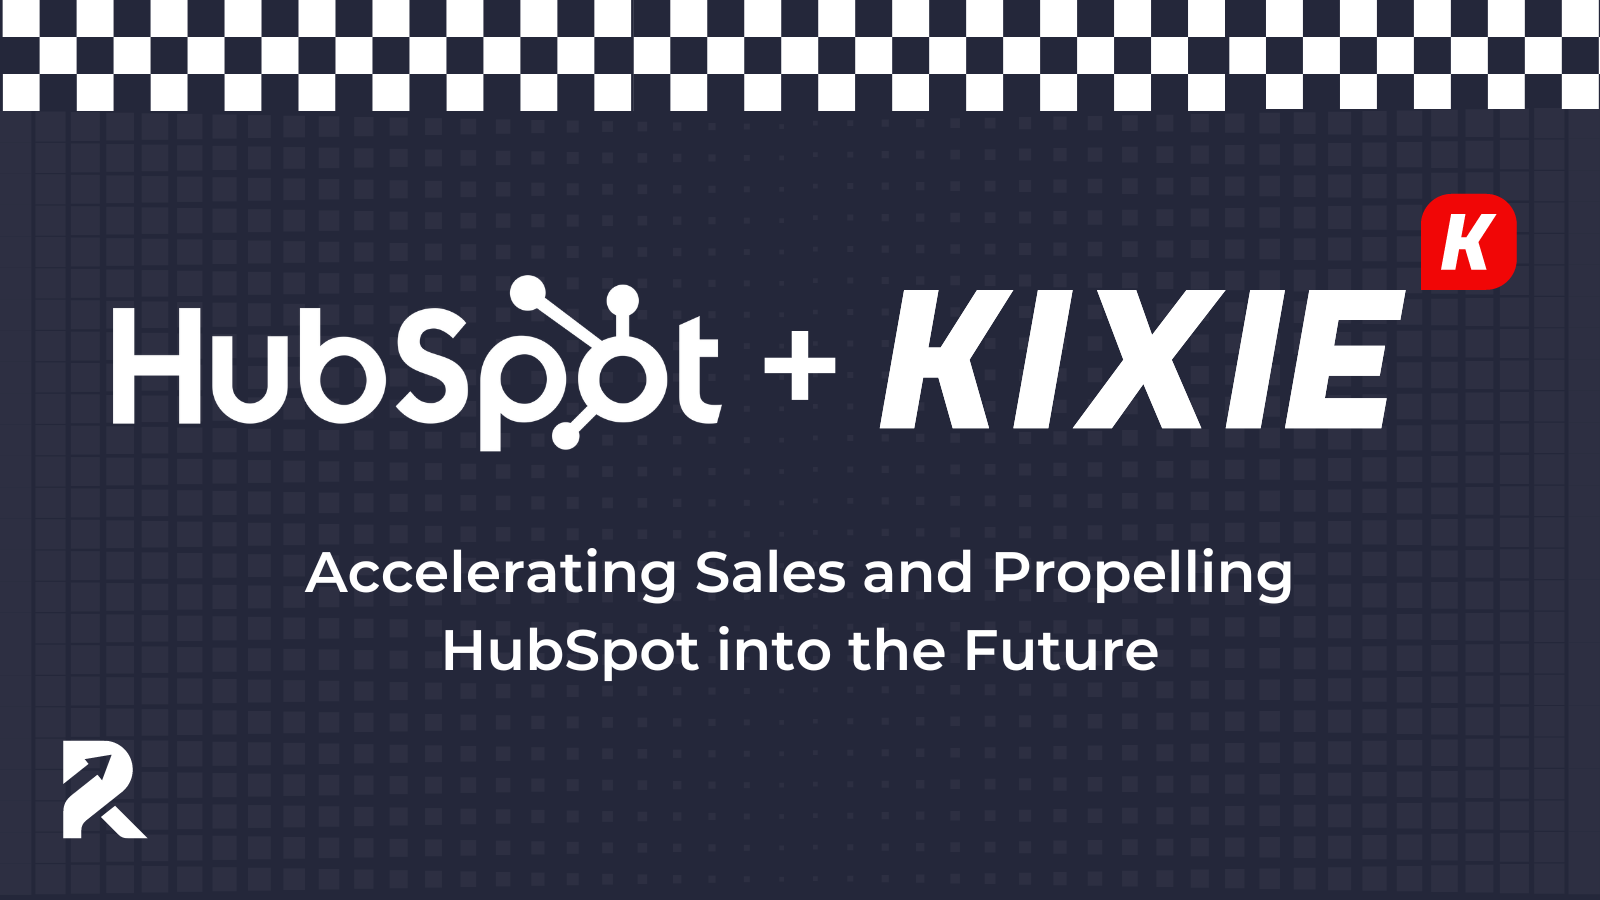 How to Accelerate Your Sales with Faster Speed to Lead with Kixie